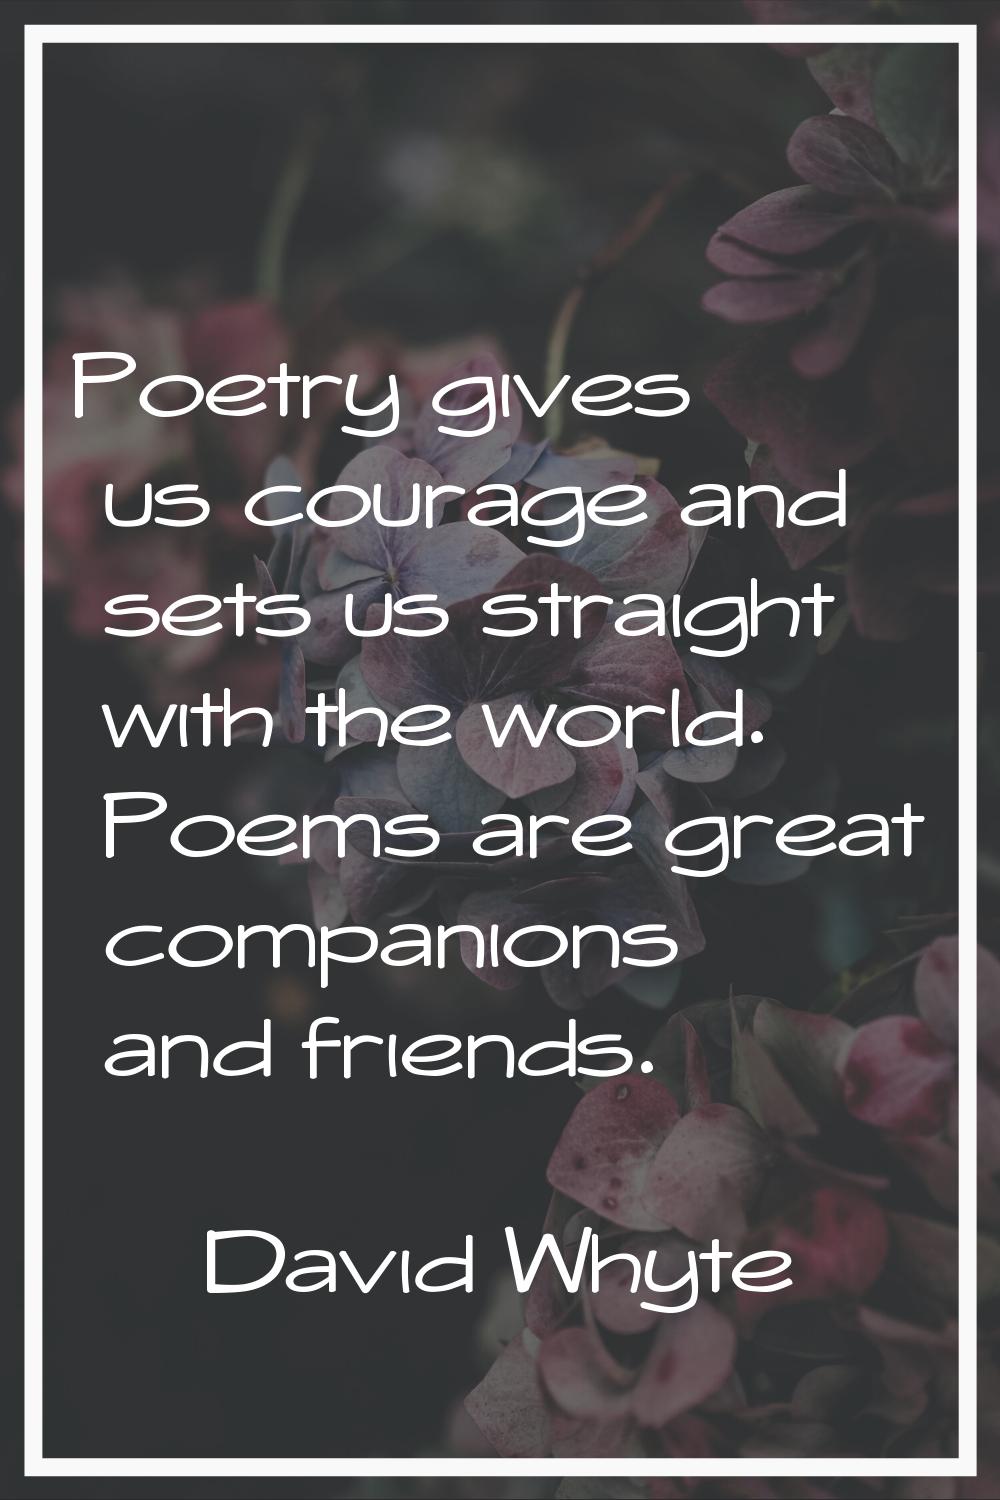 Poetry gives us courage and sets us straight with the world. Poems are great companions and friends